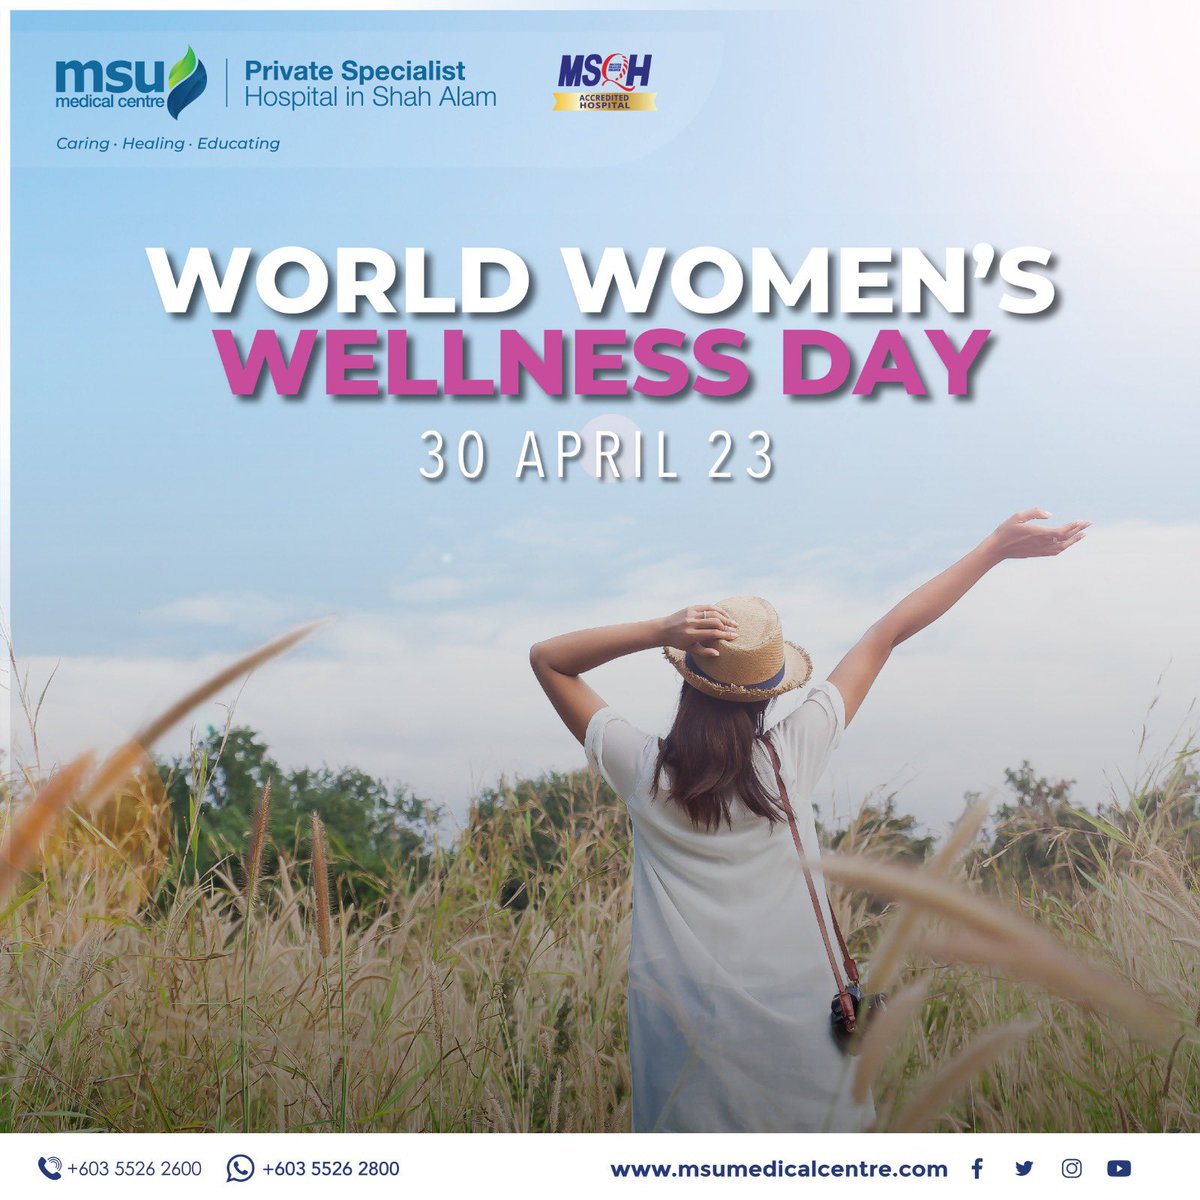 Women face certain health issues that need attention, such as menstruation health, pregnancy, and menopause. To ensure a long and meaningful existence, it is vital to prioritise women's wellness.

#CaringHealingEducating
#MSUMC 
#womenwellness